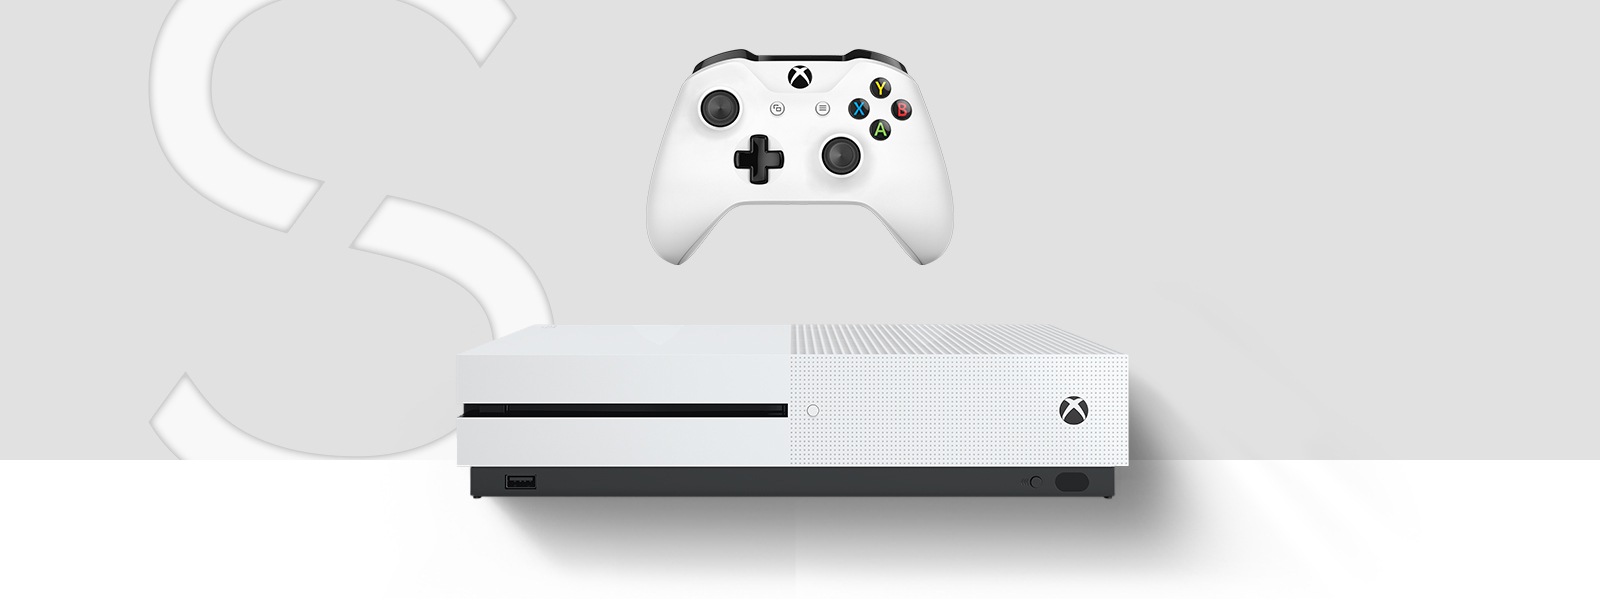 Front view of the Xbox One S console in front of a large stylized letter S